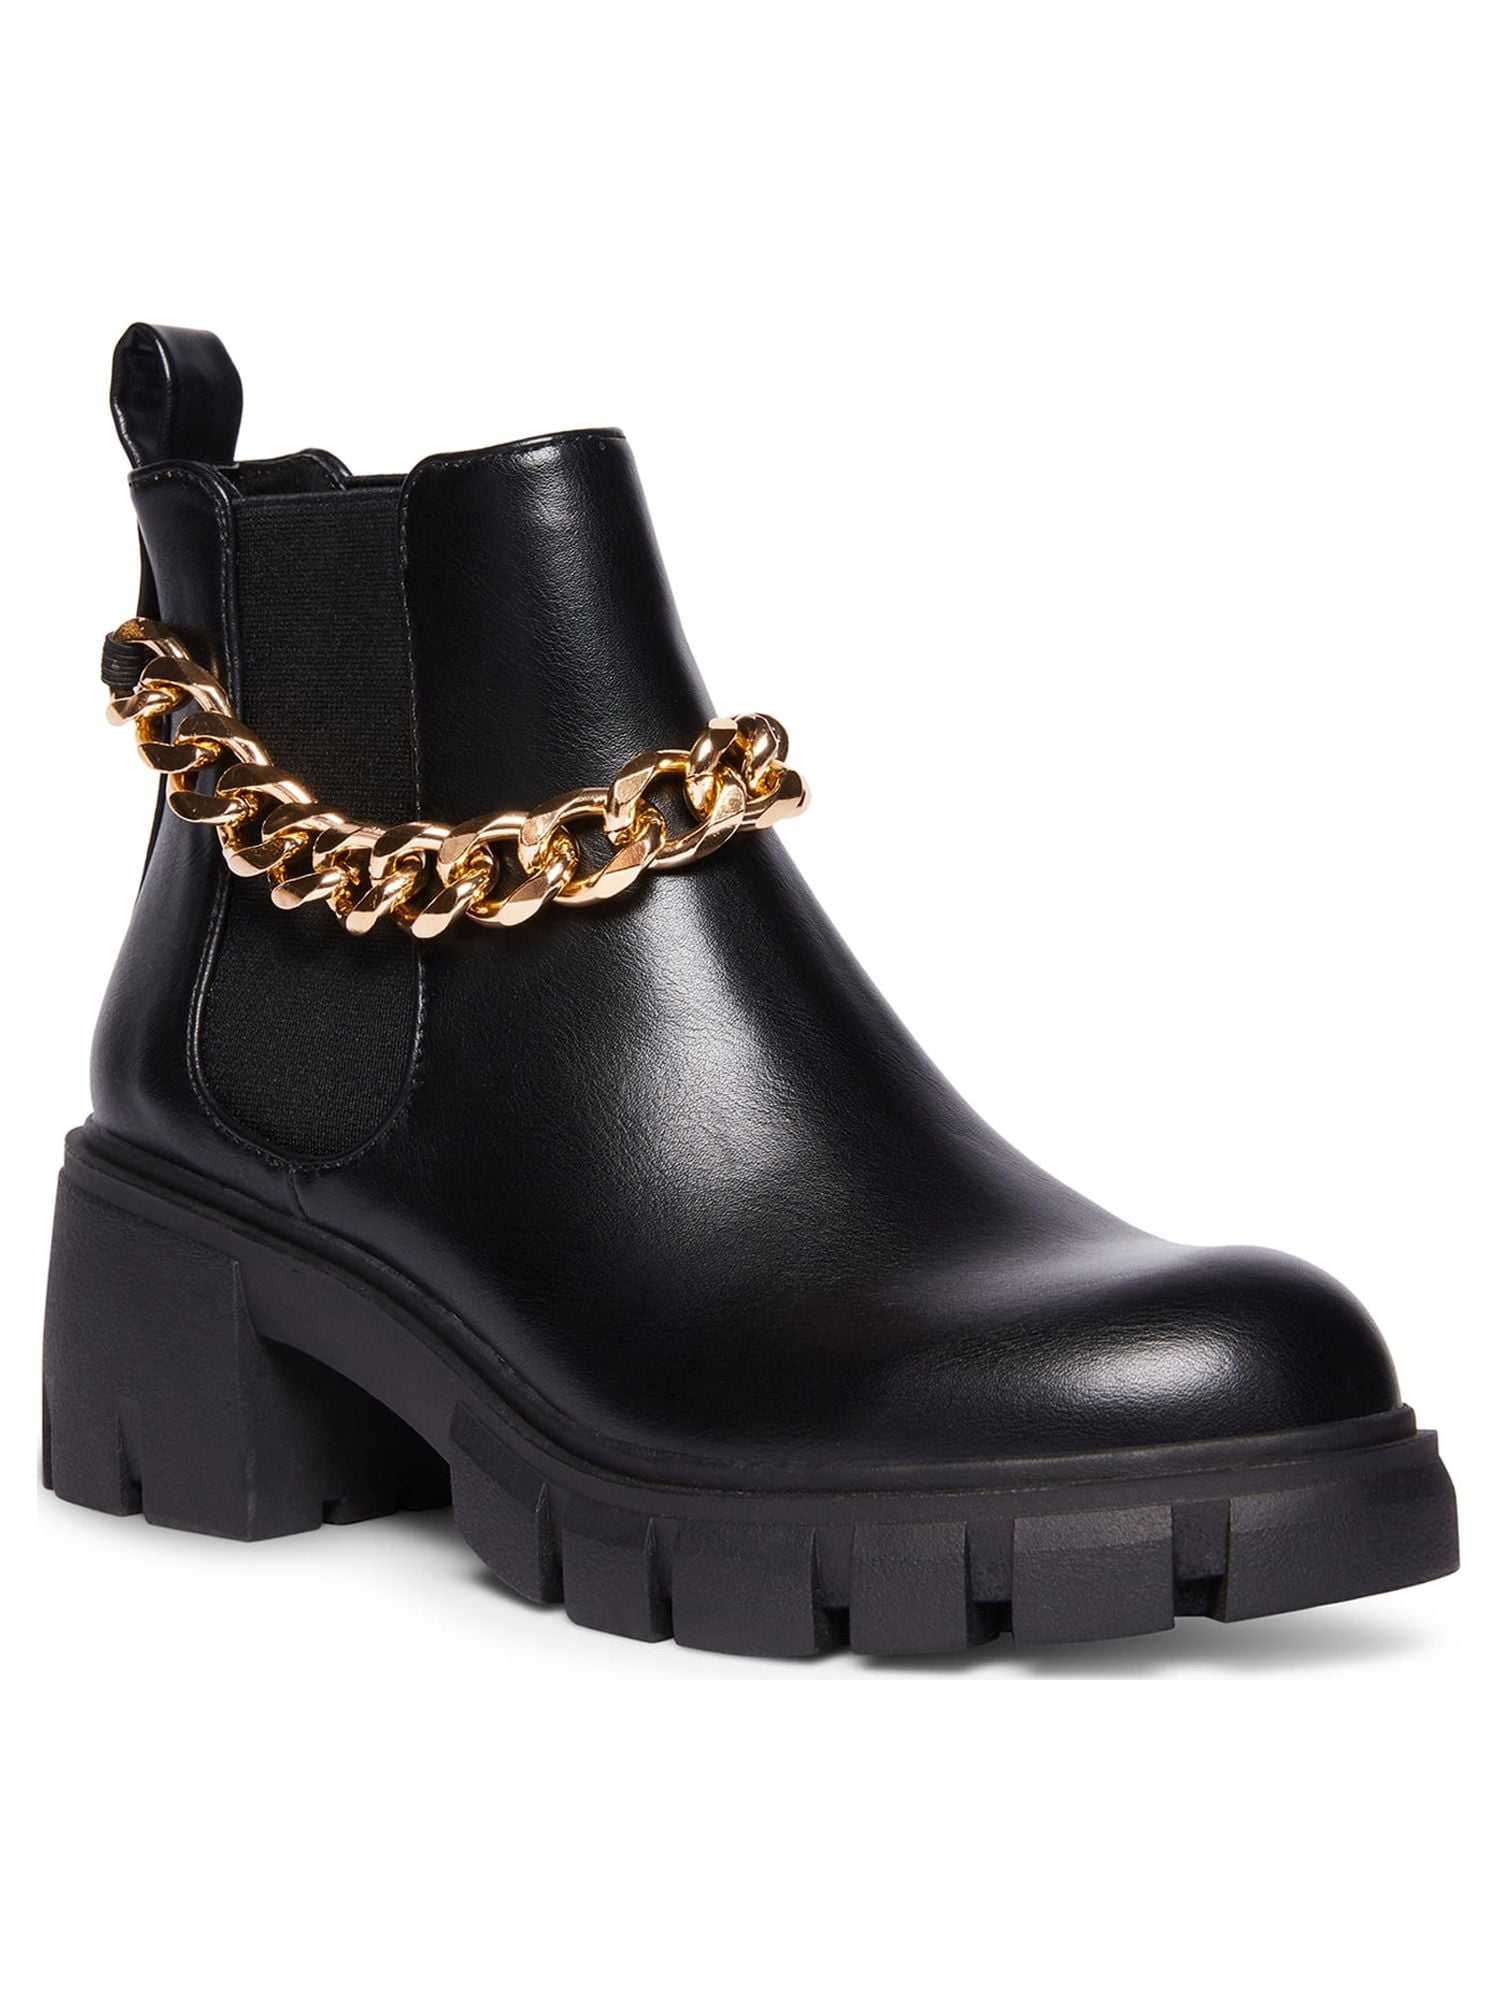 Chelsea Chain Ankle Boots靴